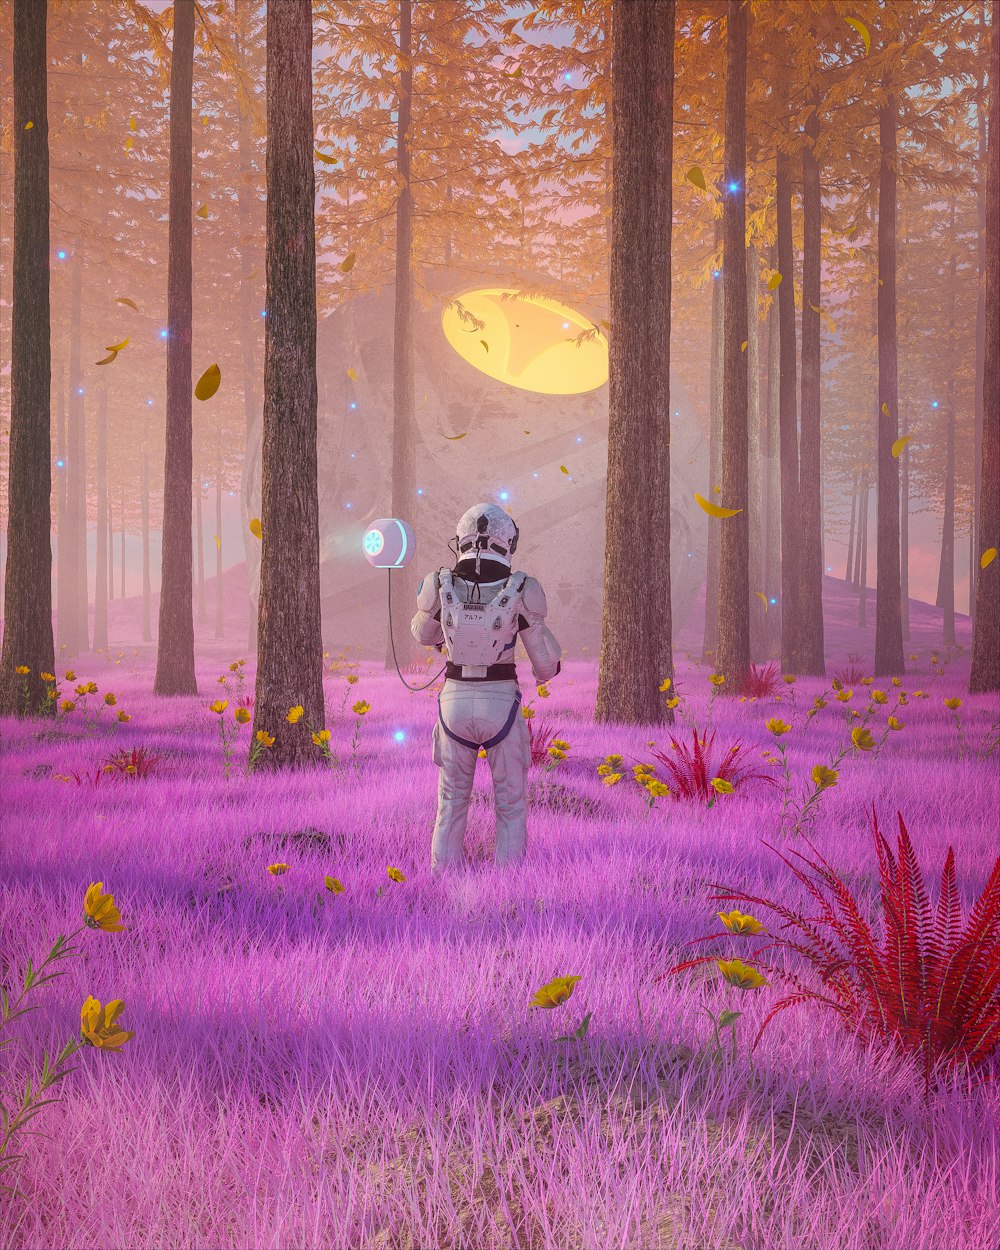 a man in a space suit standing in a field of purple flowers